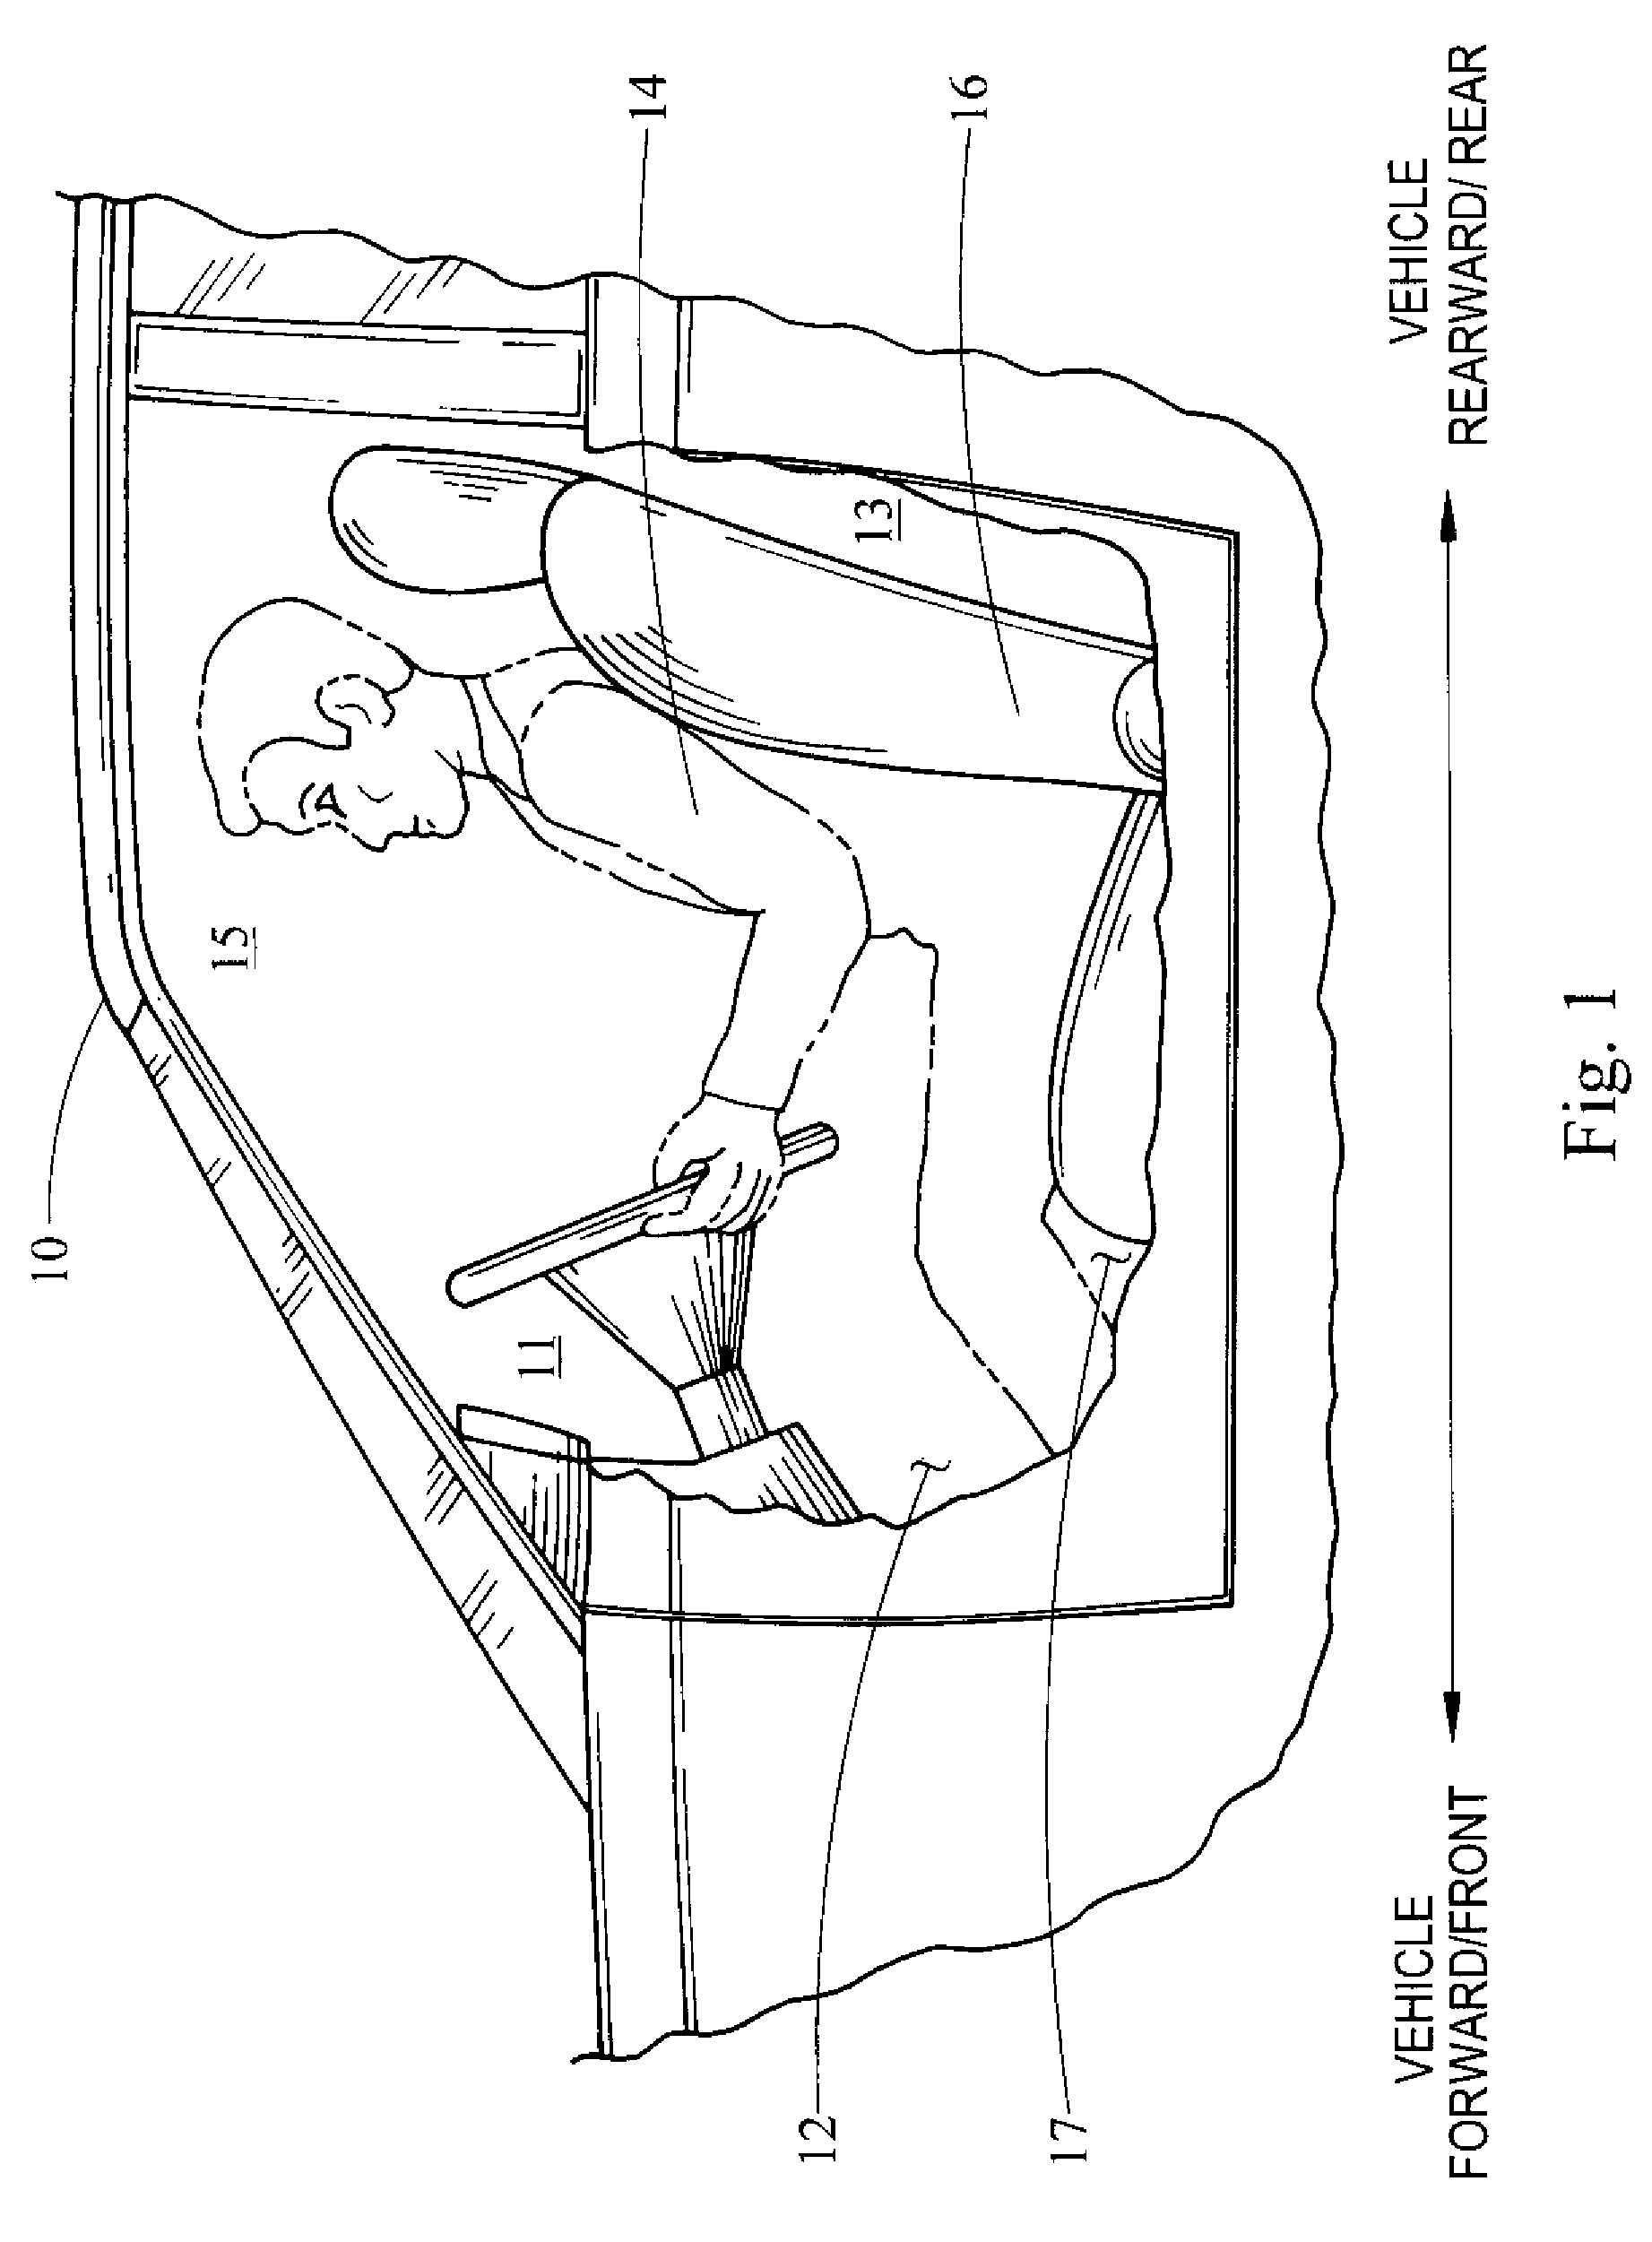 Airbag for protection of a vehicle occupant